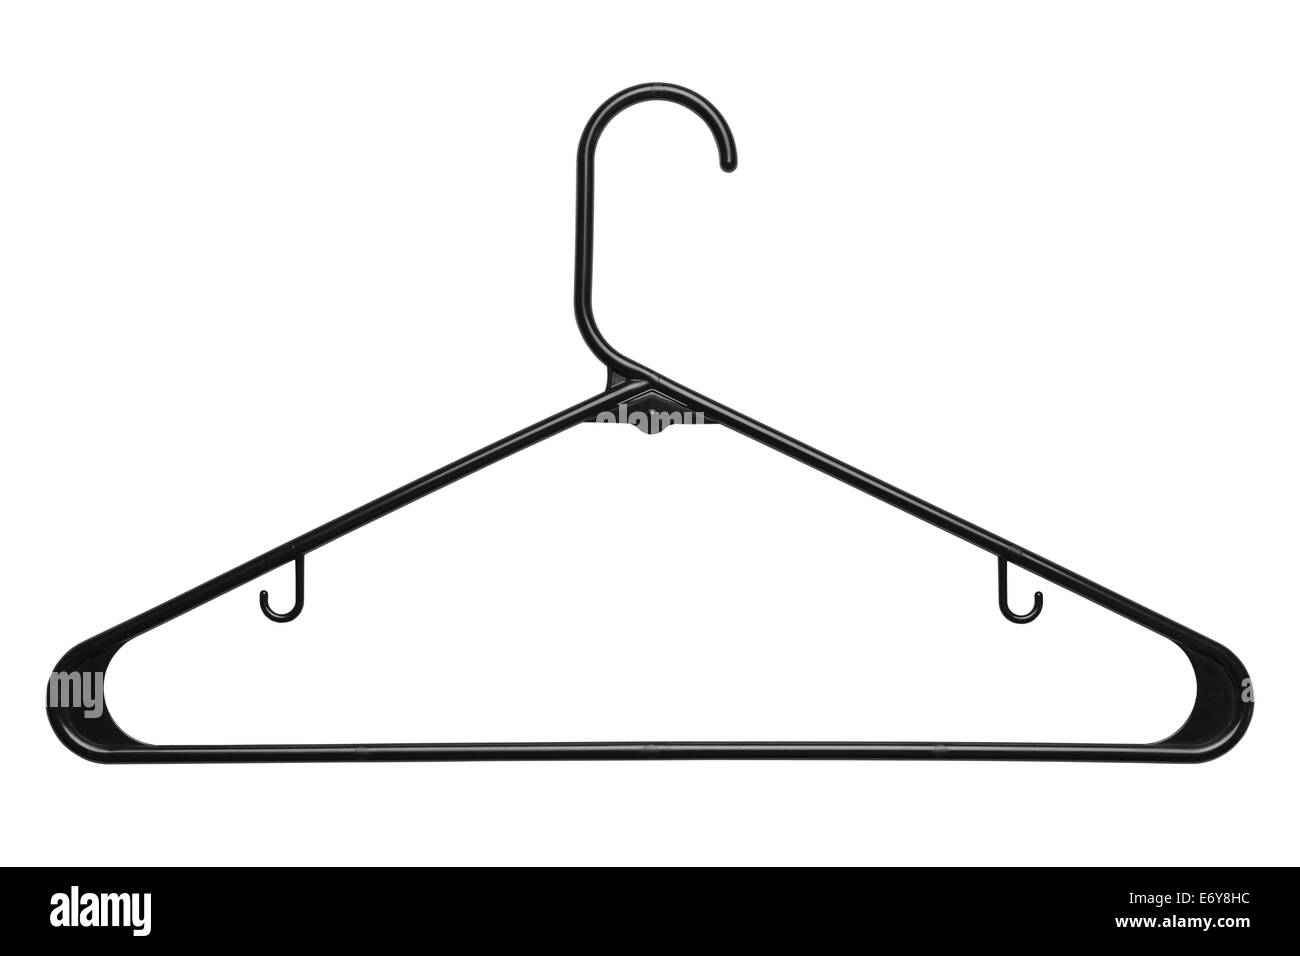 Black Plastic Clothes Hanger Isolated on White Background. Stock Photo